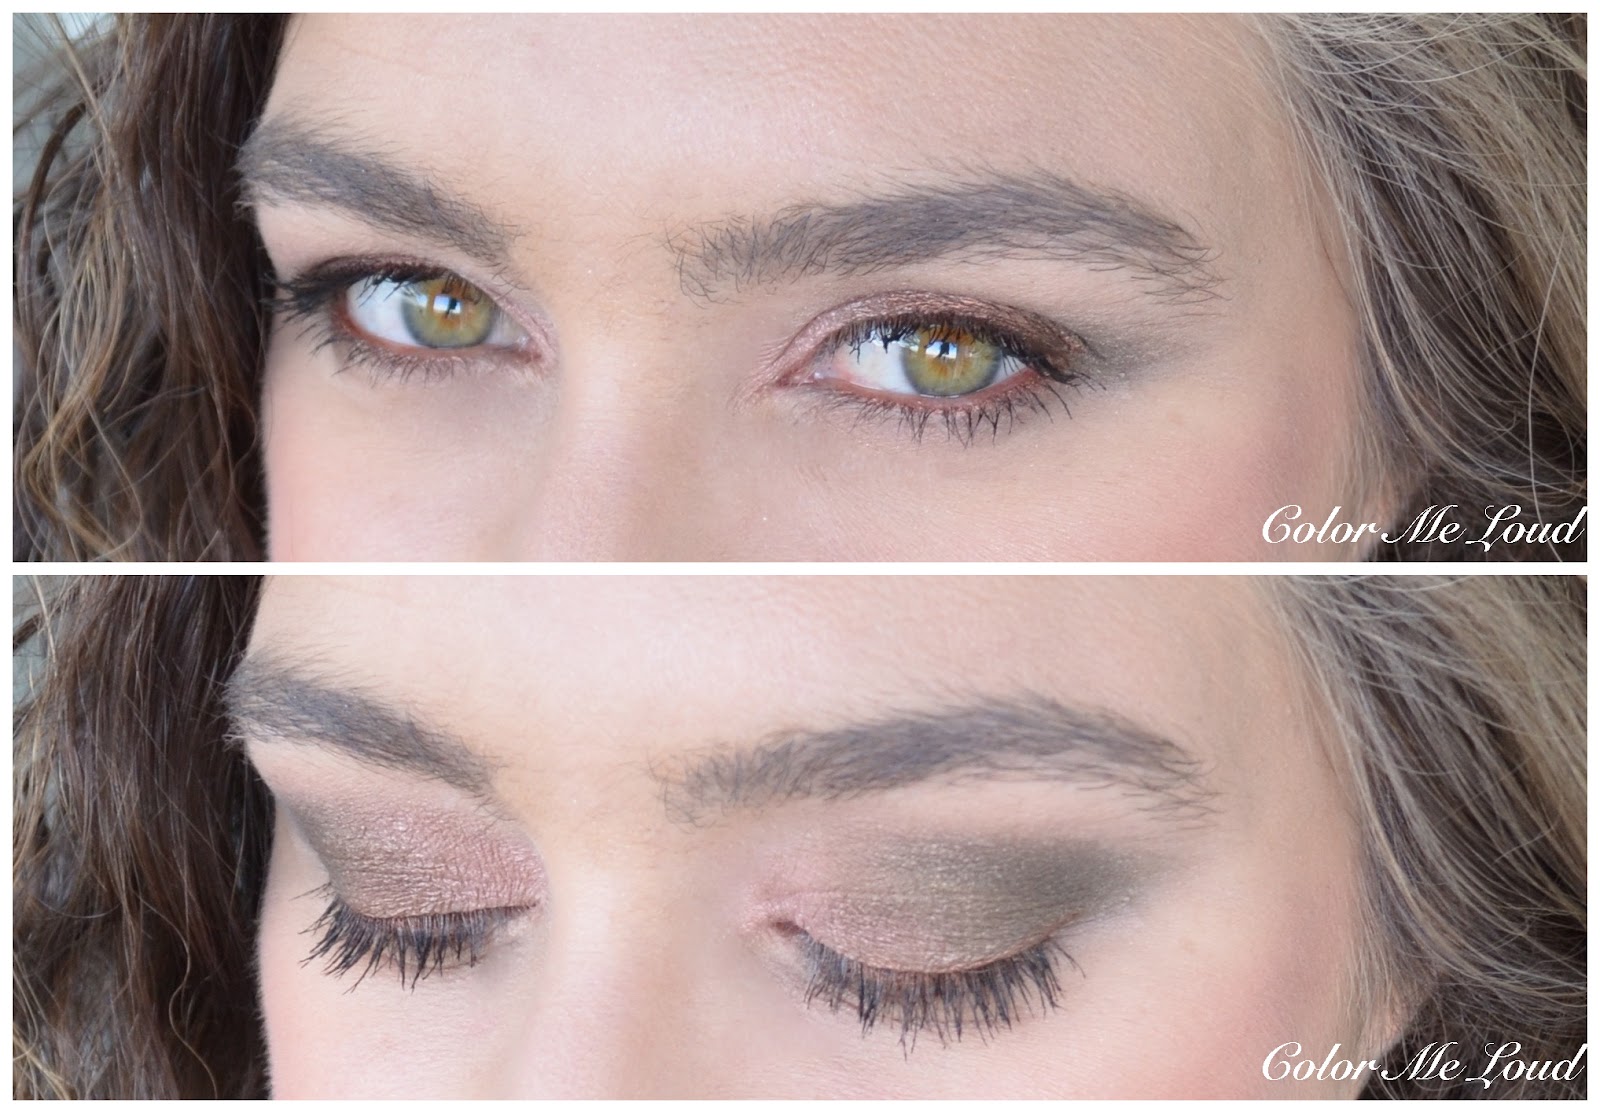 Chanel Eye Makeup Chart: How to Wear Chanel Les 4 Ombres Eye